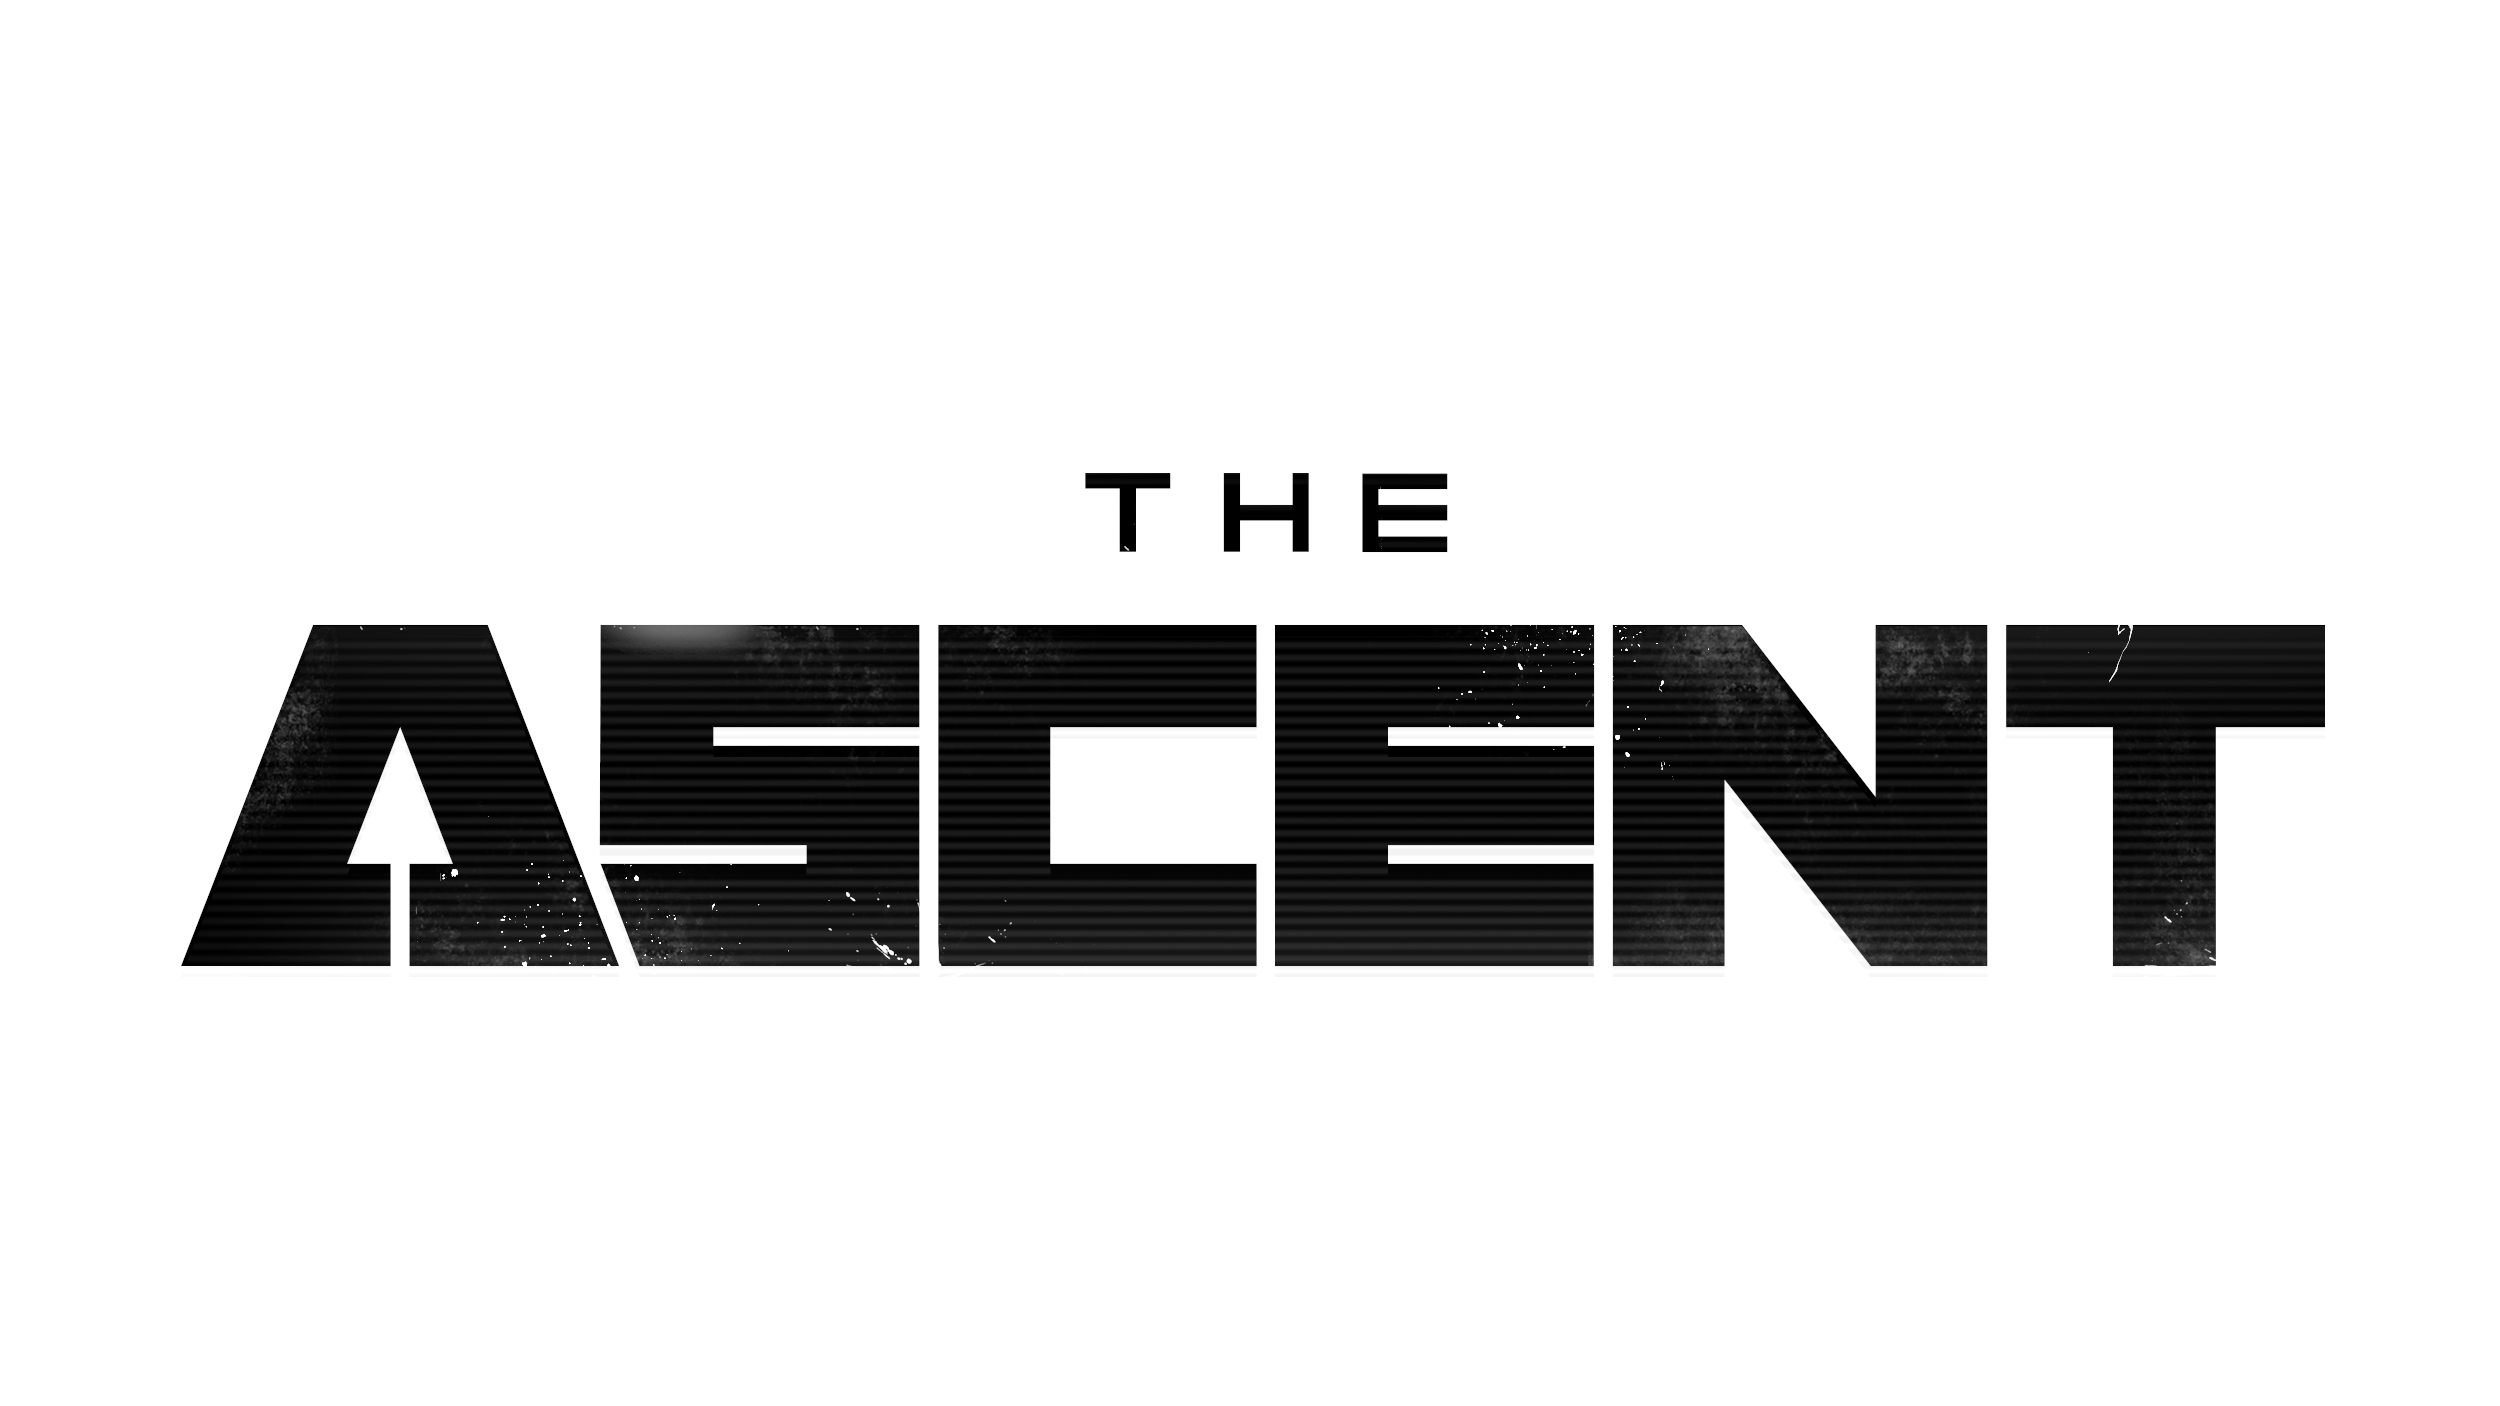 Video Game The Ascent 2500x1406